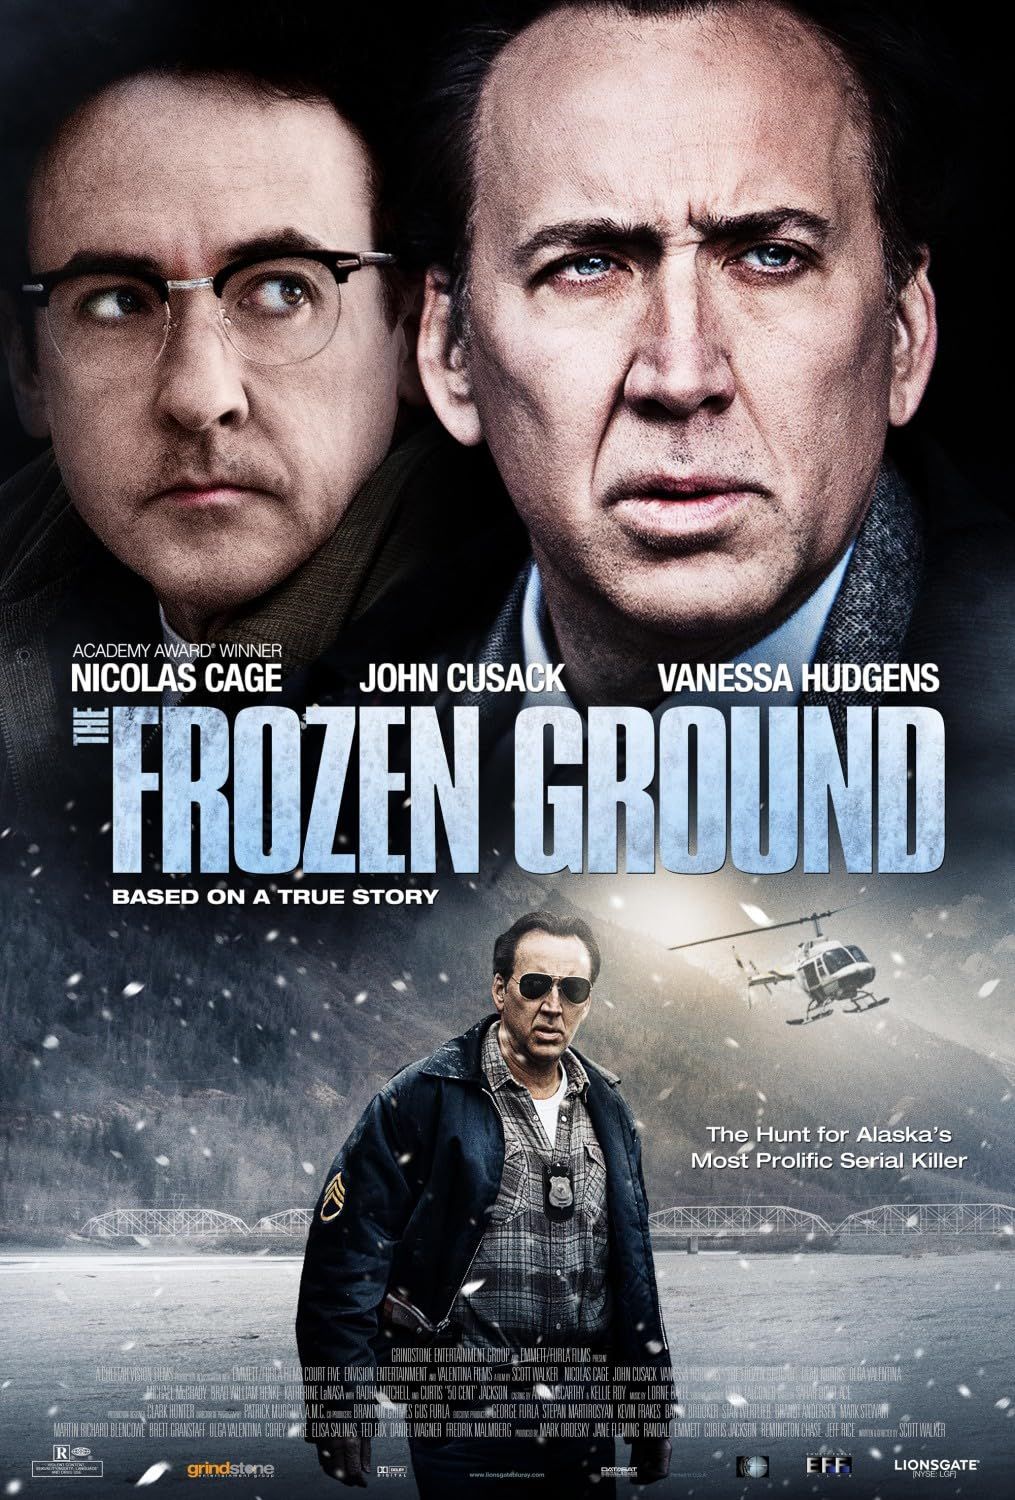 The Frozen Ground (2013) Hindi Dubbed download full movie